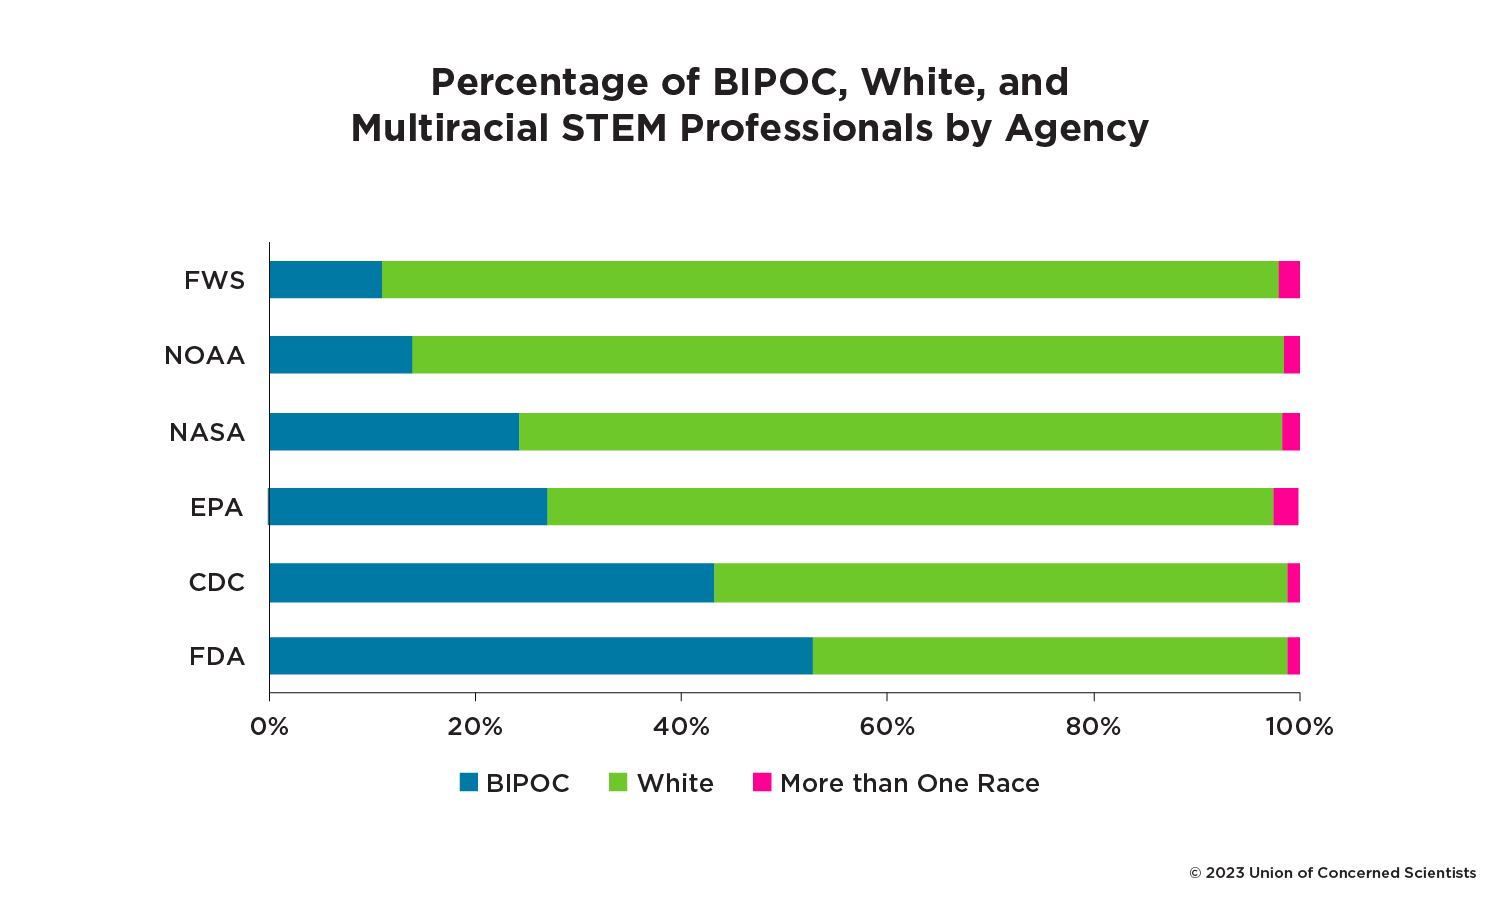 This graph shows the percentage of BIPOC, White, and multiracial STEM professionals currently employed at six separate federal agencies 